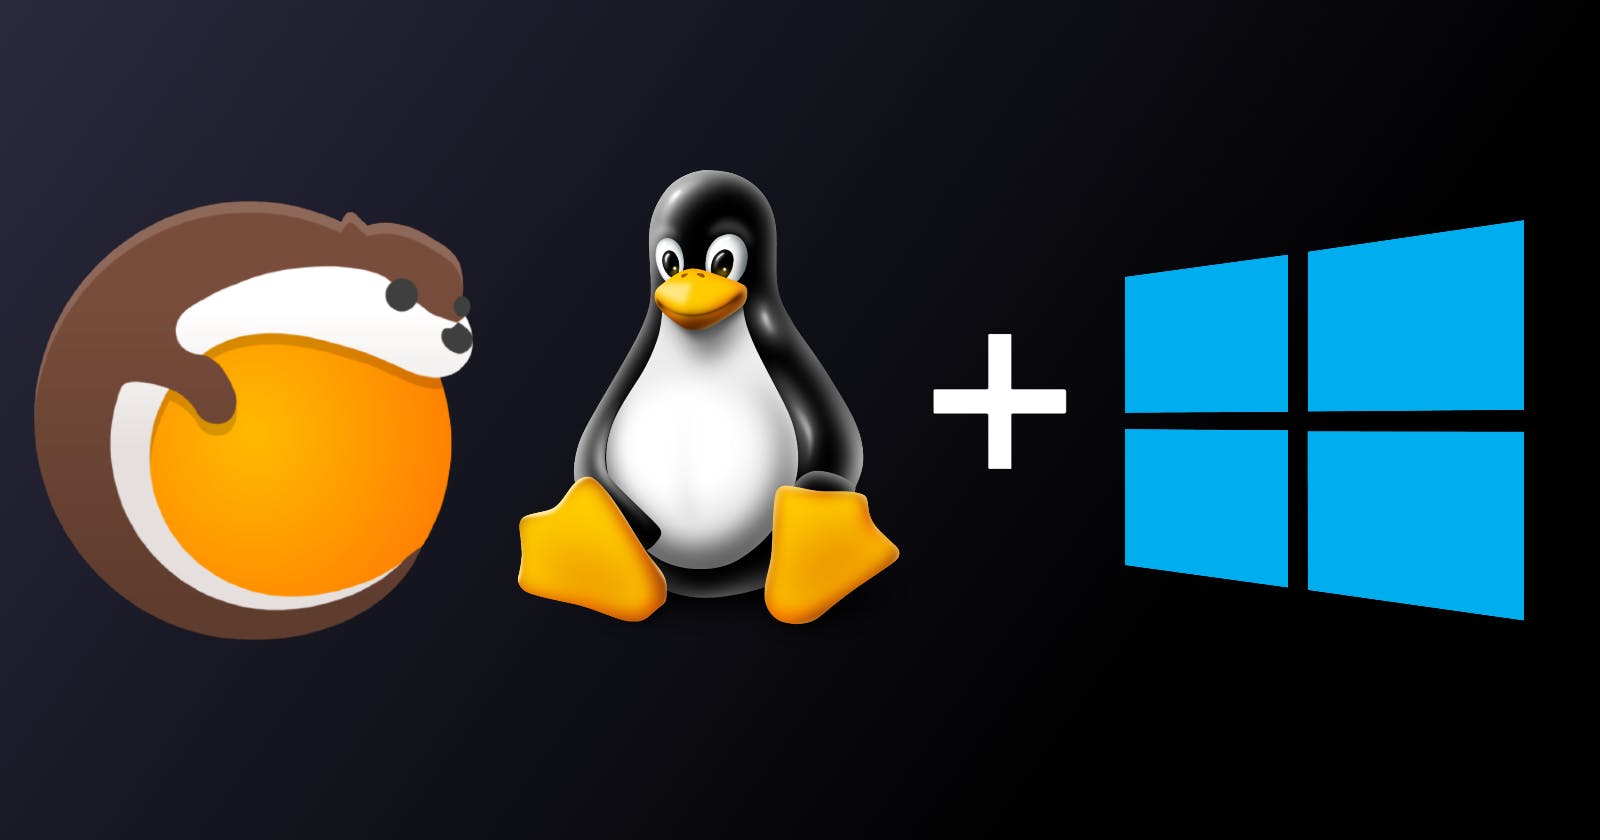 How to manually install a Windows game using Lutris on Linux